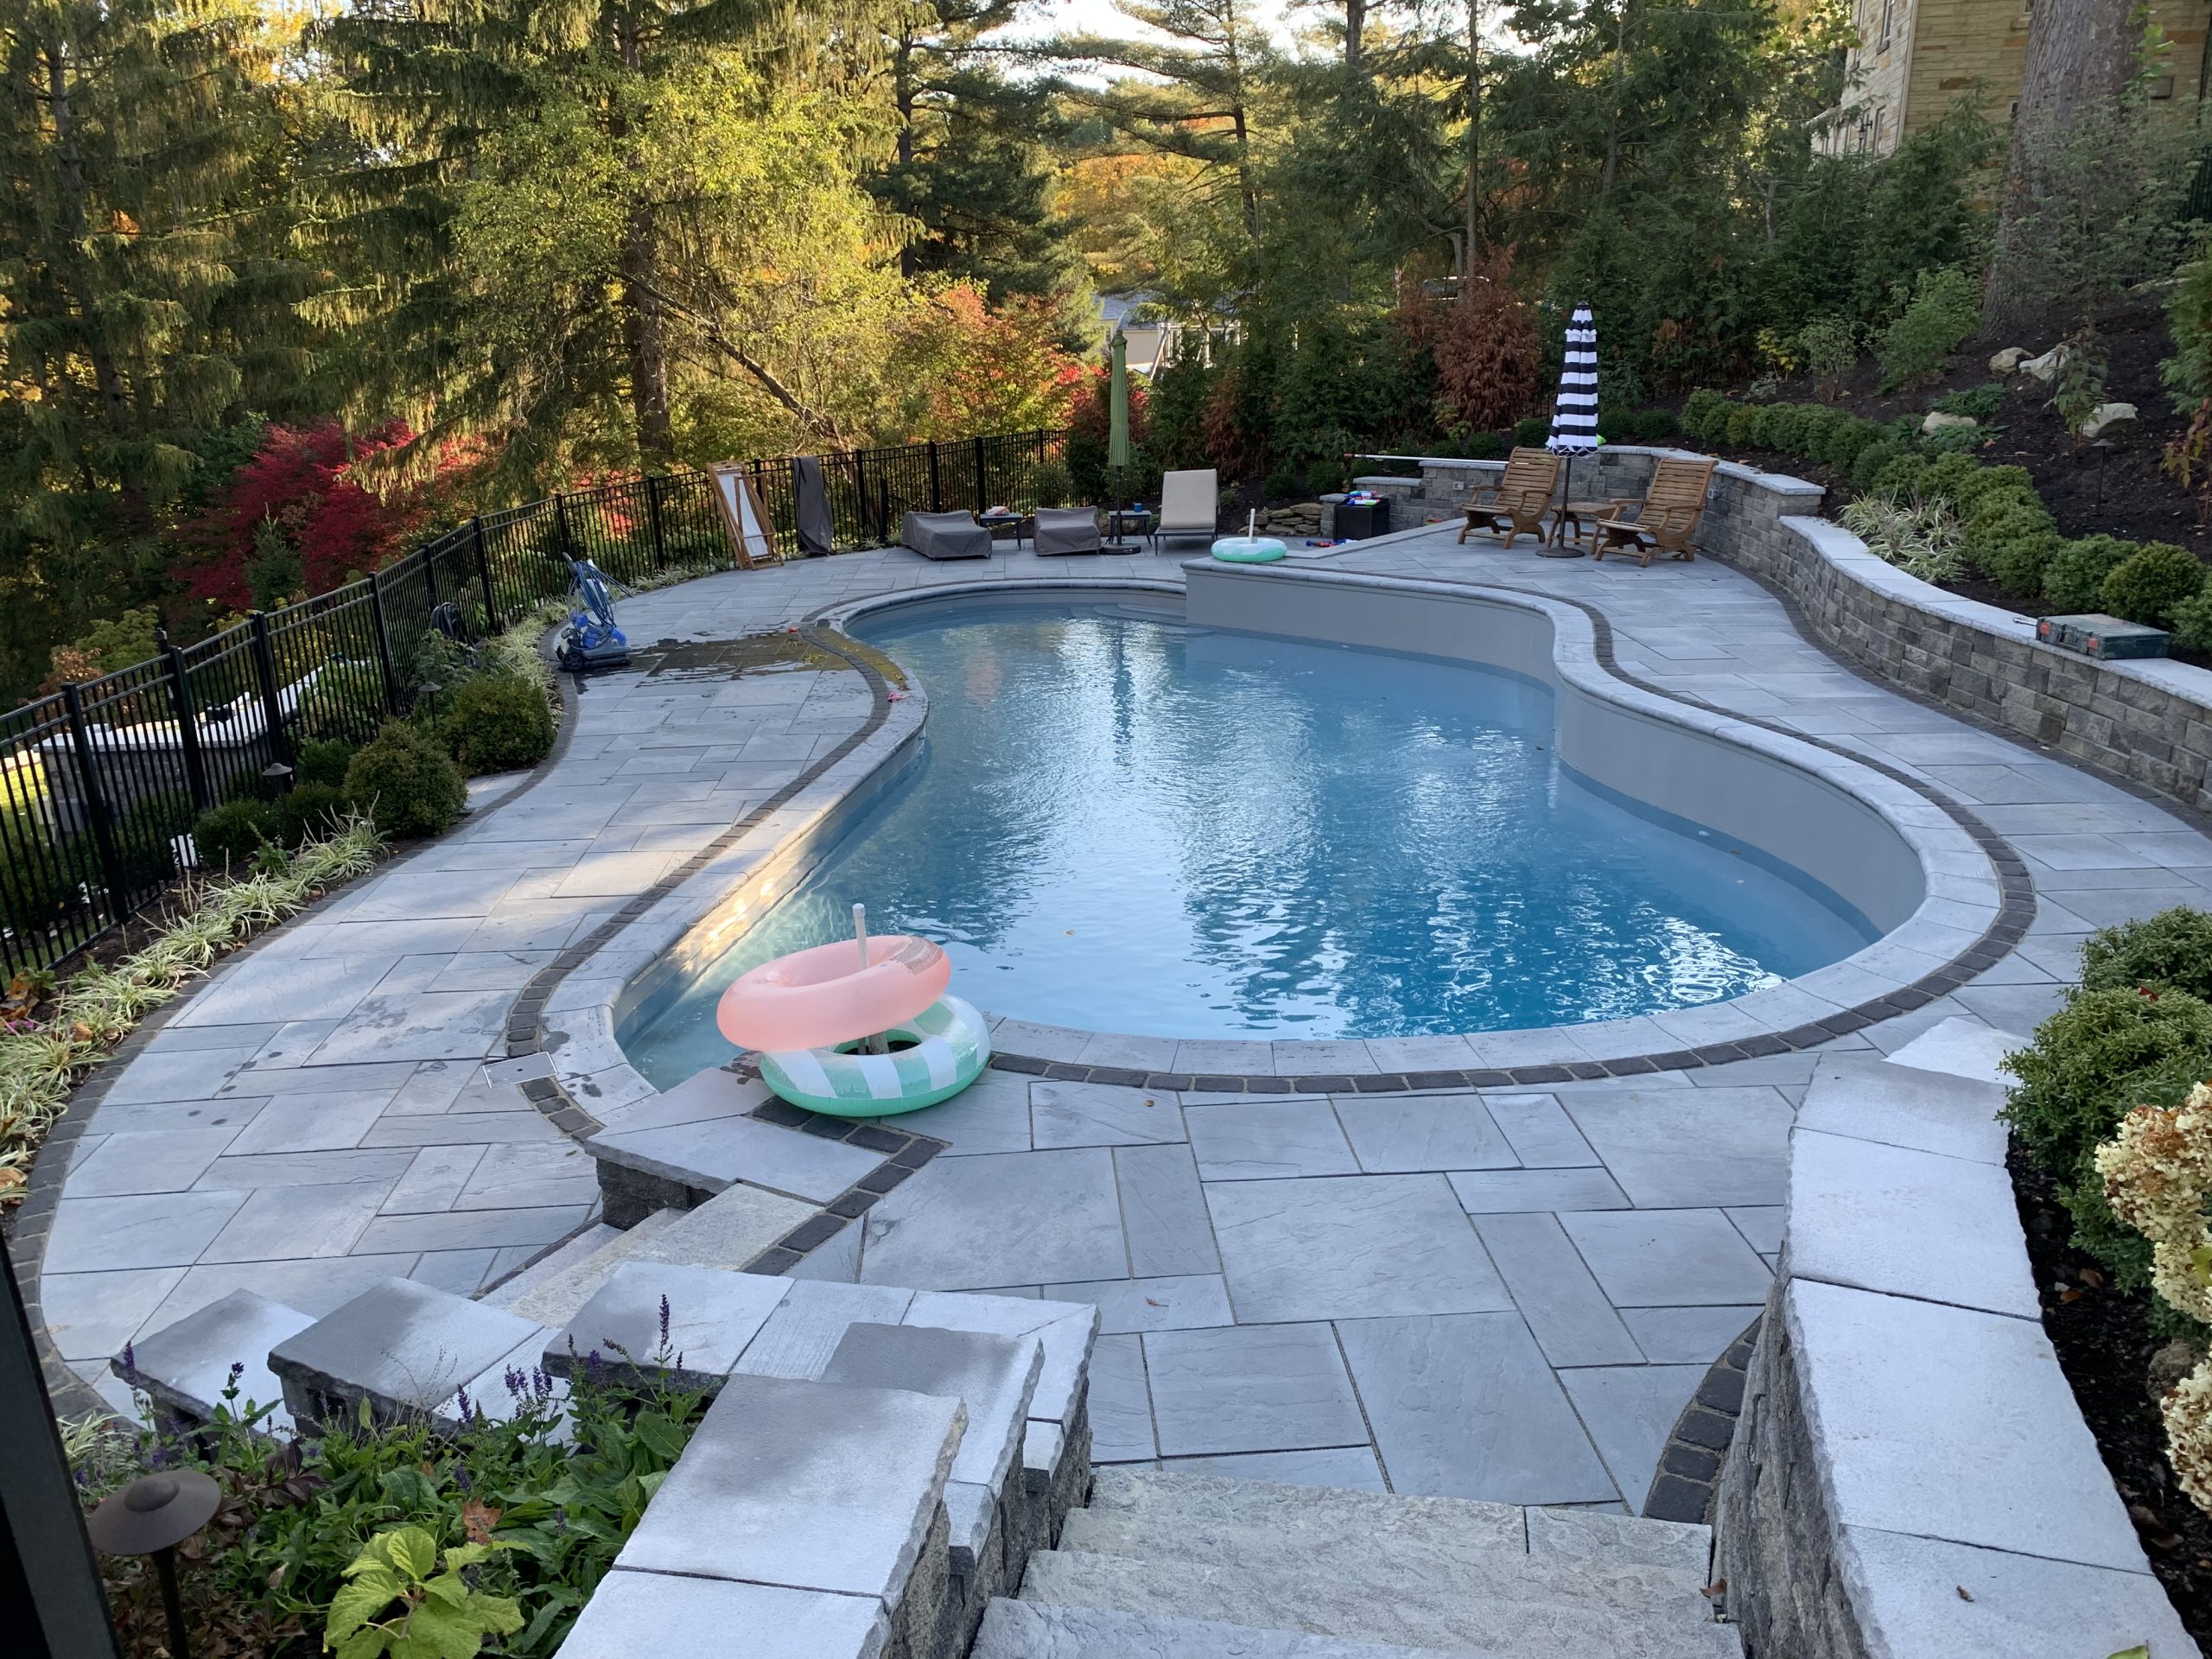 Pool and Patio Deck